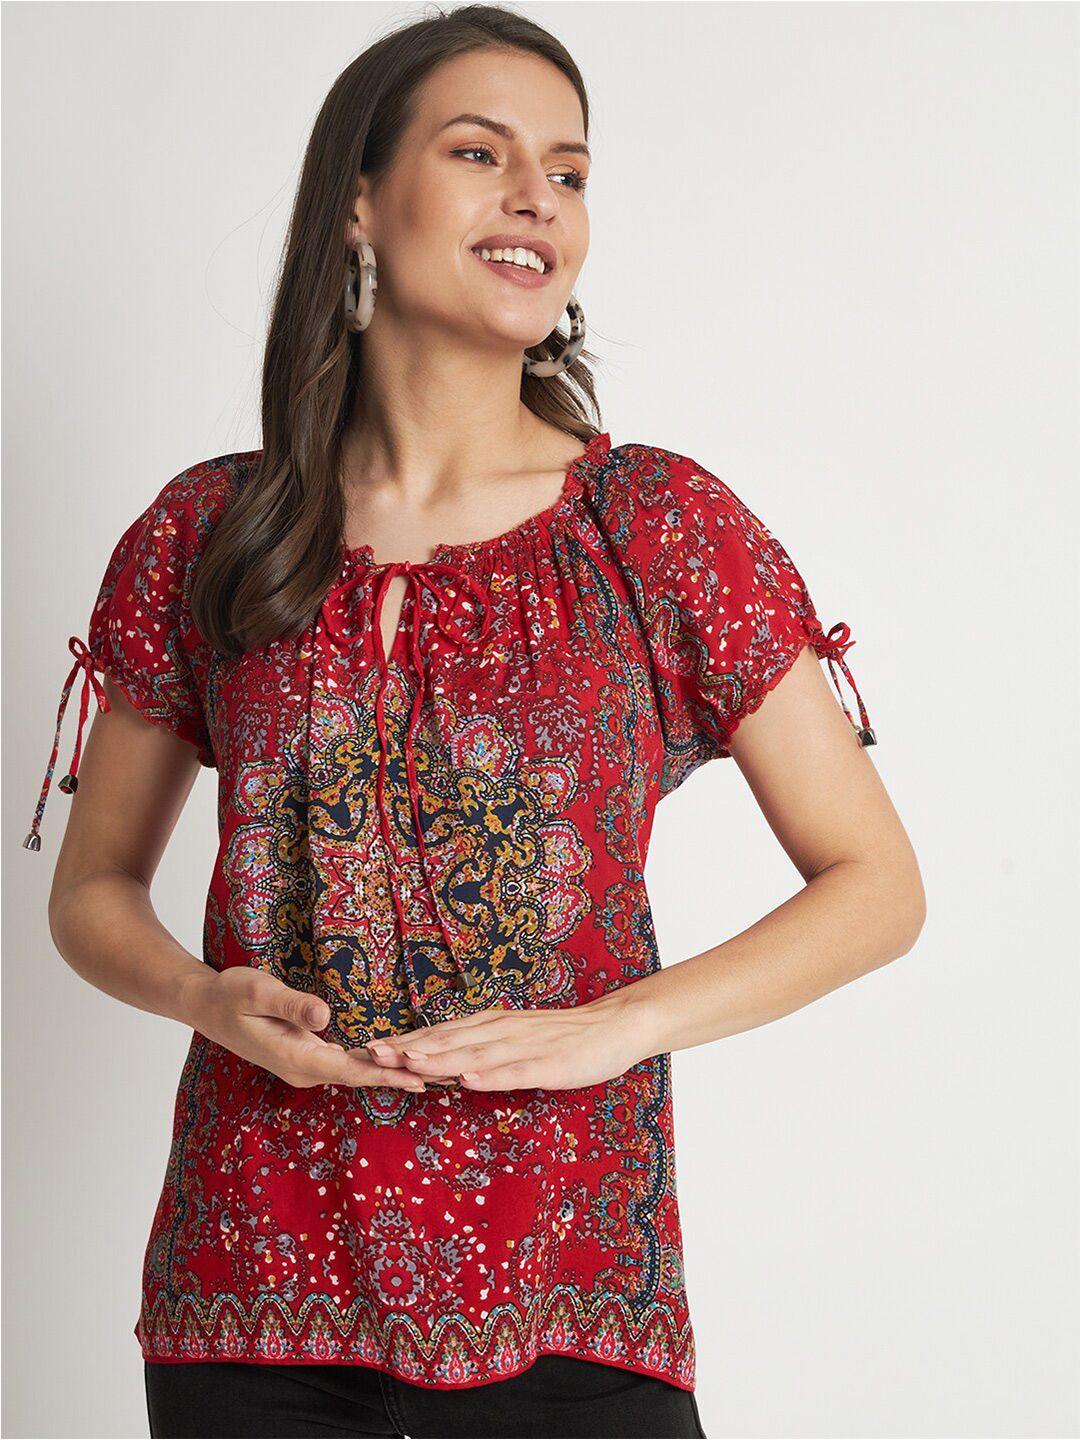 veldress red floral print top